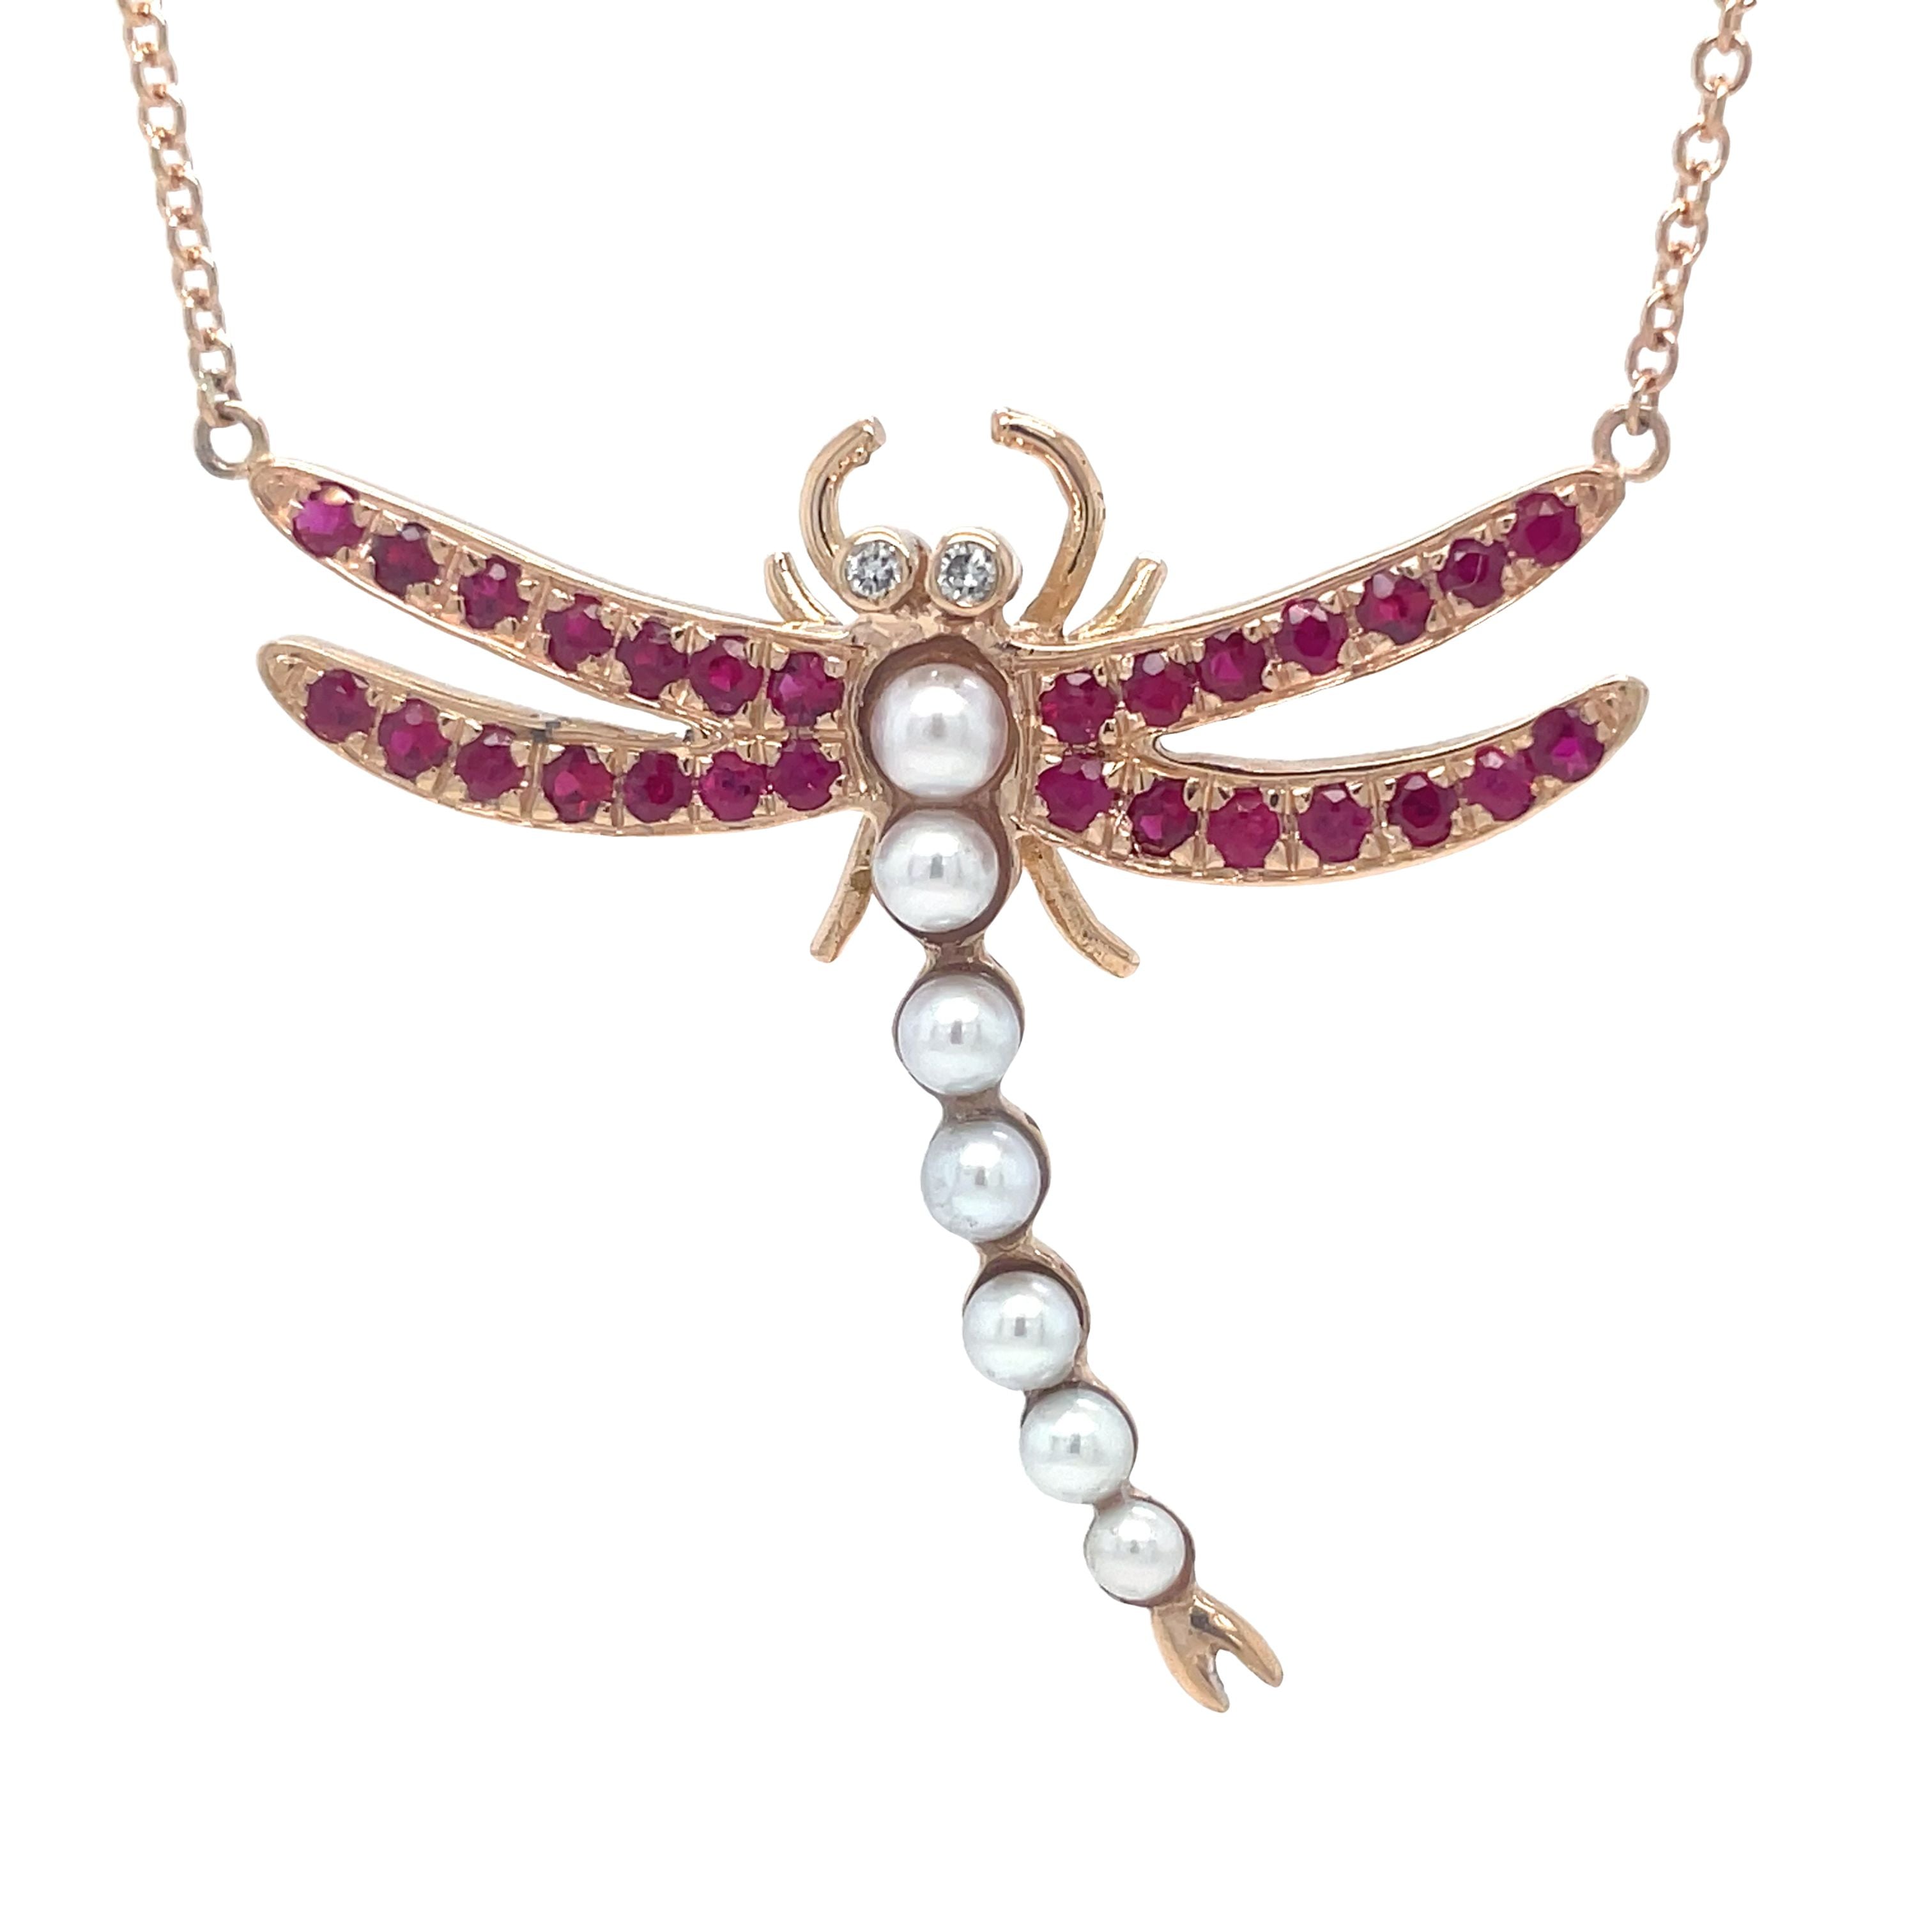 This one-of-a-kind custom made dragonfly pendant necklace is crafted with custom 18k rose gold and adorned with a stunning dragonfly pendant and 7 cultured pearls. The round rubies add a touch of elegance to this 18-inch rose gold necklace. Elevate any outfit with this unique and luxurious piece!